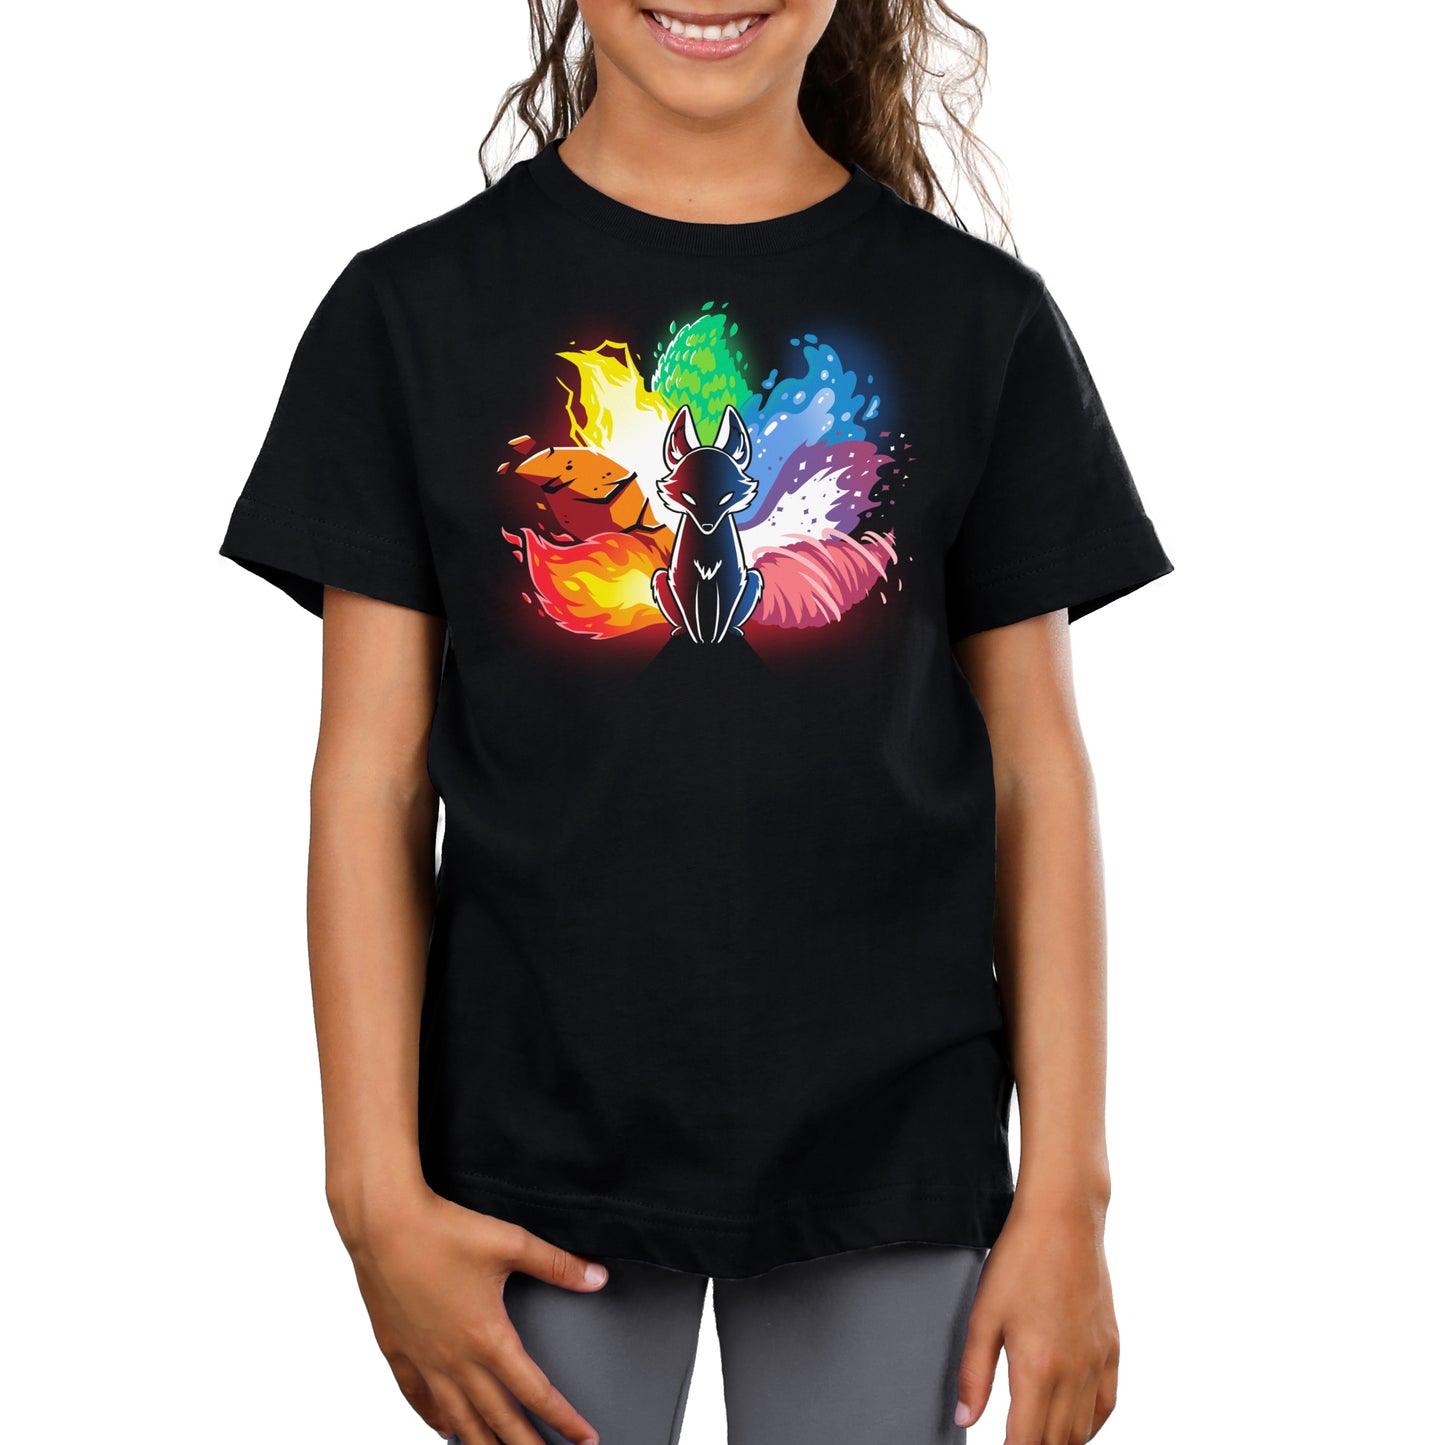 A girl wearing an Elemental Kitsune black t-shirt with an image of a pokémon on it, made by TeeTurtle.